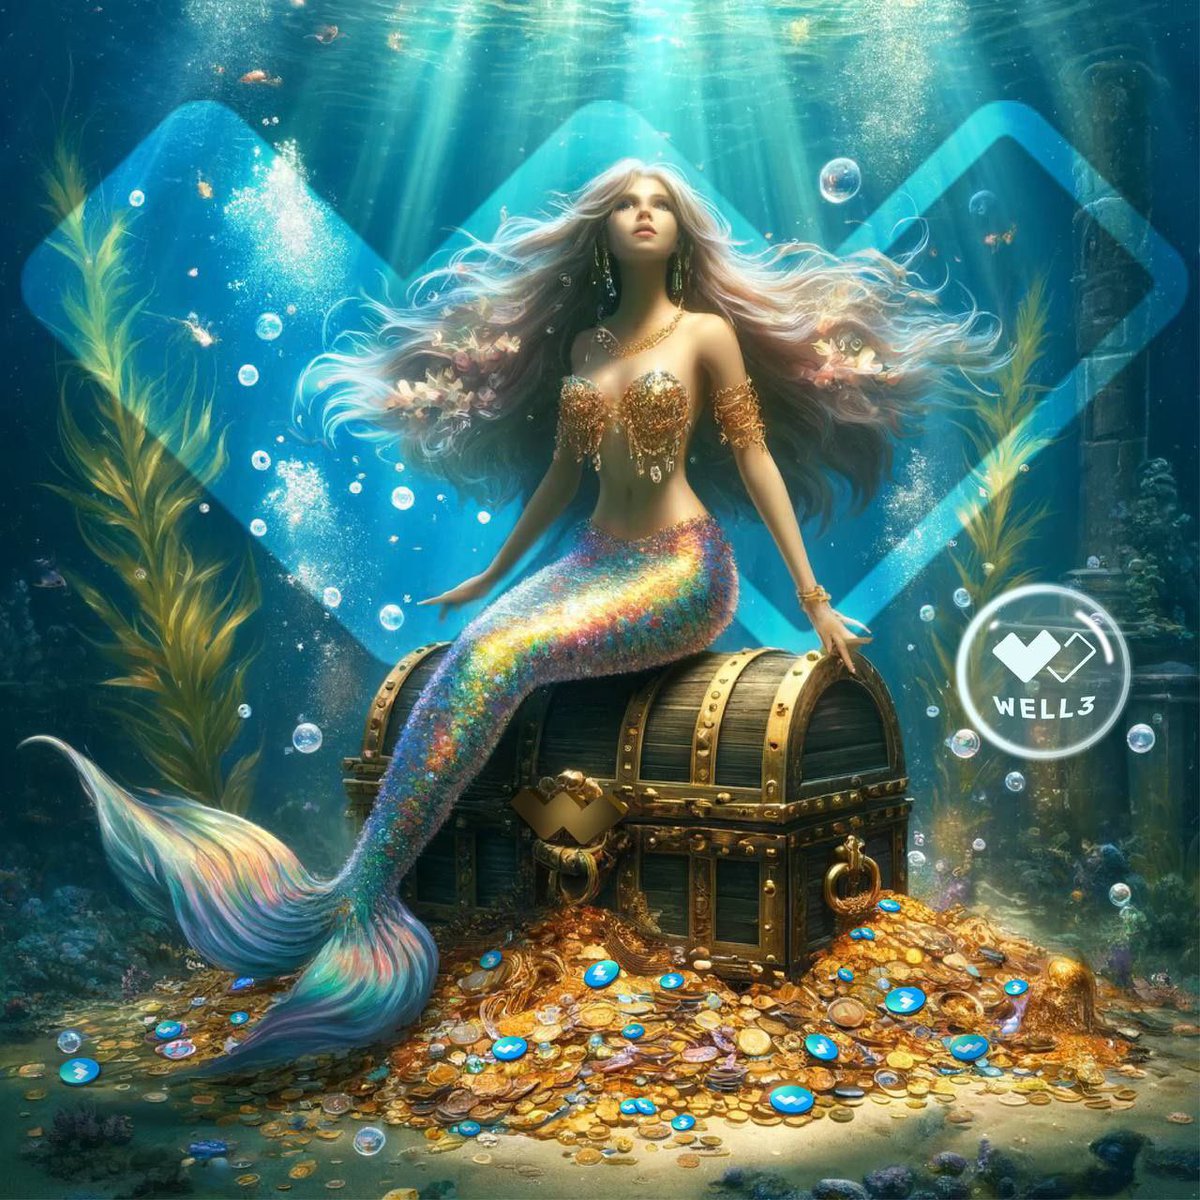 Whispers filled the air... Speaking of the imminent arrival of mermaids at AQUAWELL, bearing precious $WELL for those in attendance... Will you be among them? ------- AQUAWELL by WELL3 - the featured side event of Token2049, Dubai. Venue: The Lost Chambers, Atlantis The…